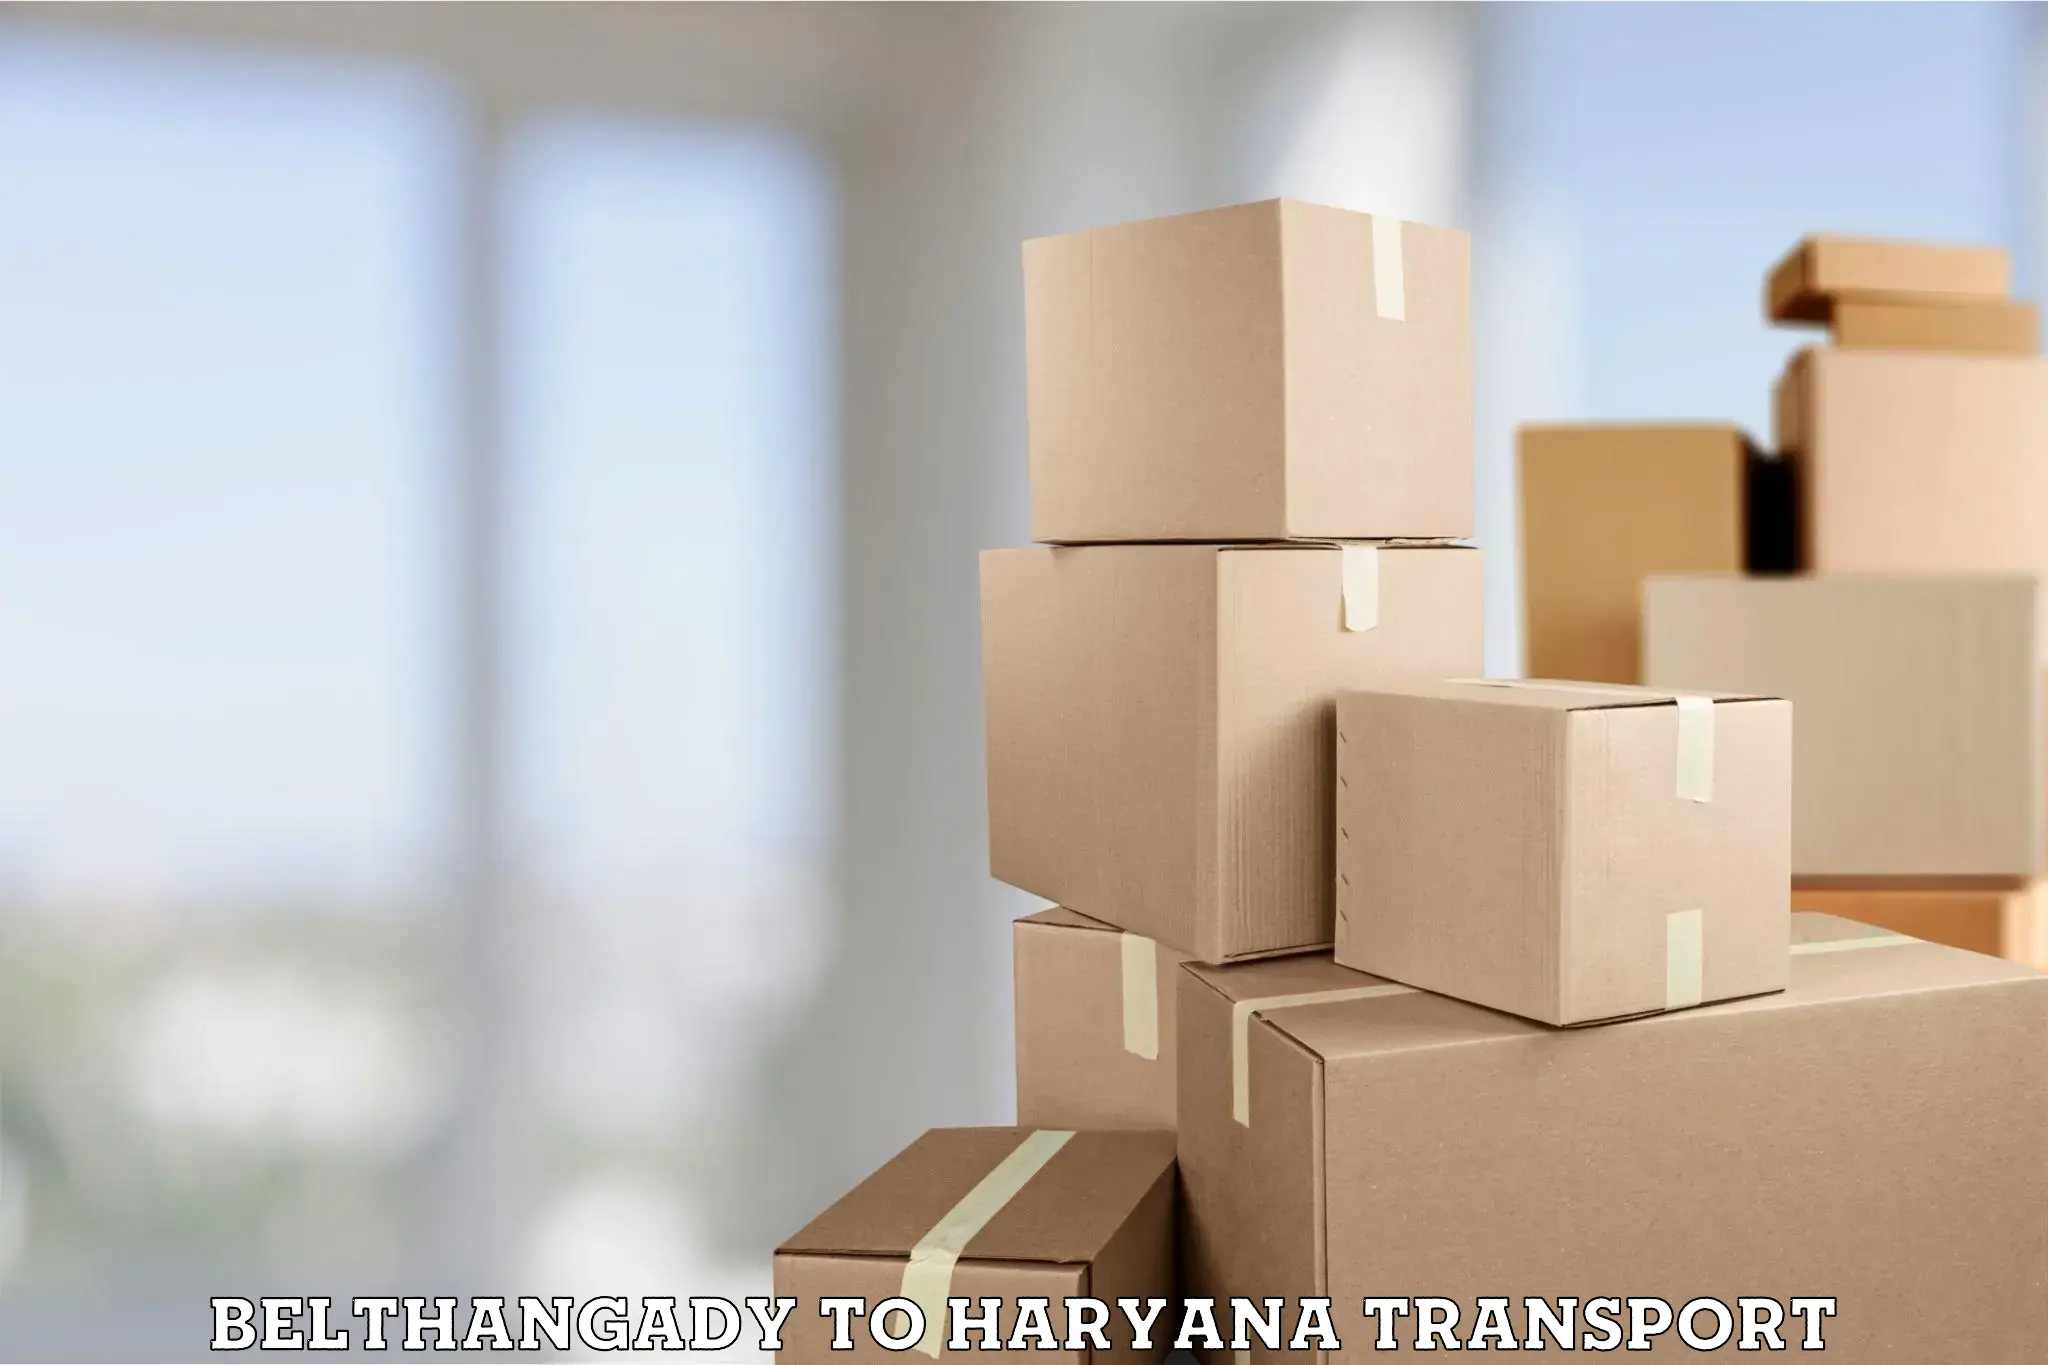 Daily parcel service transport Belthangady to Hansi